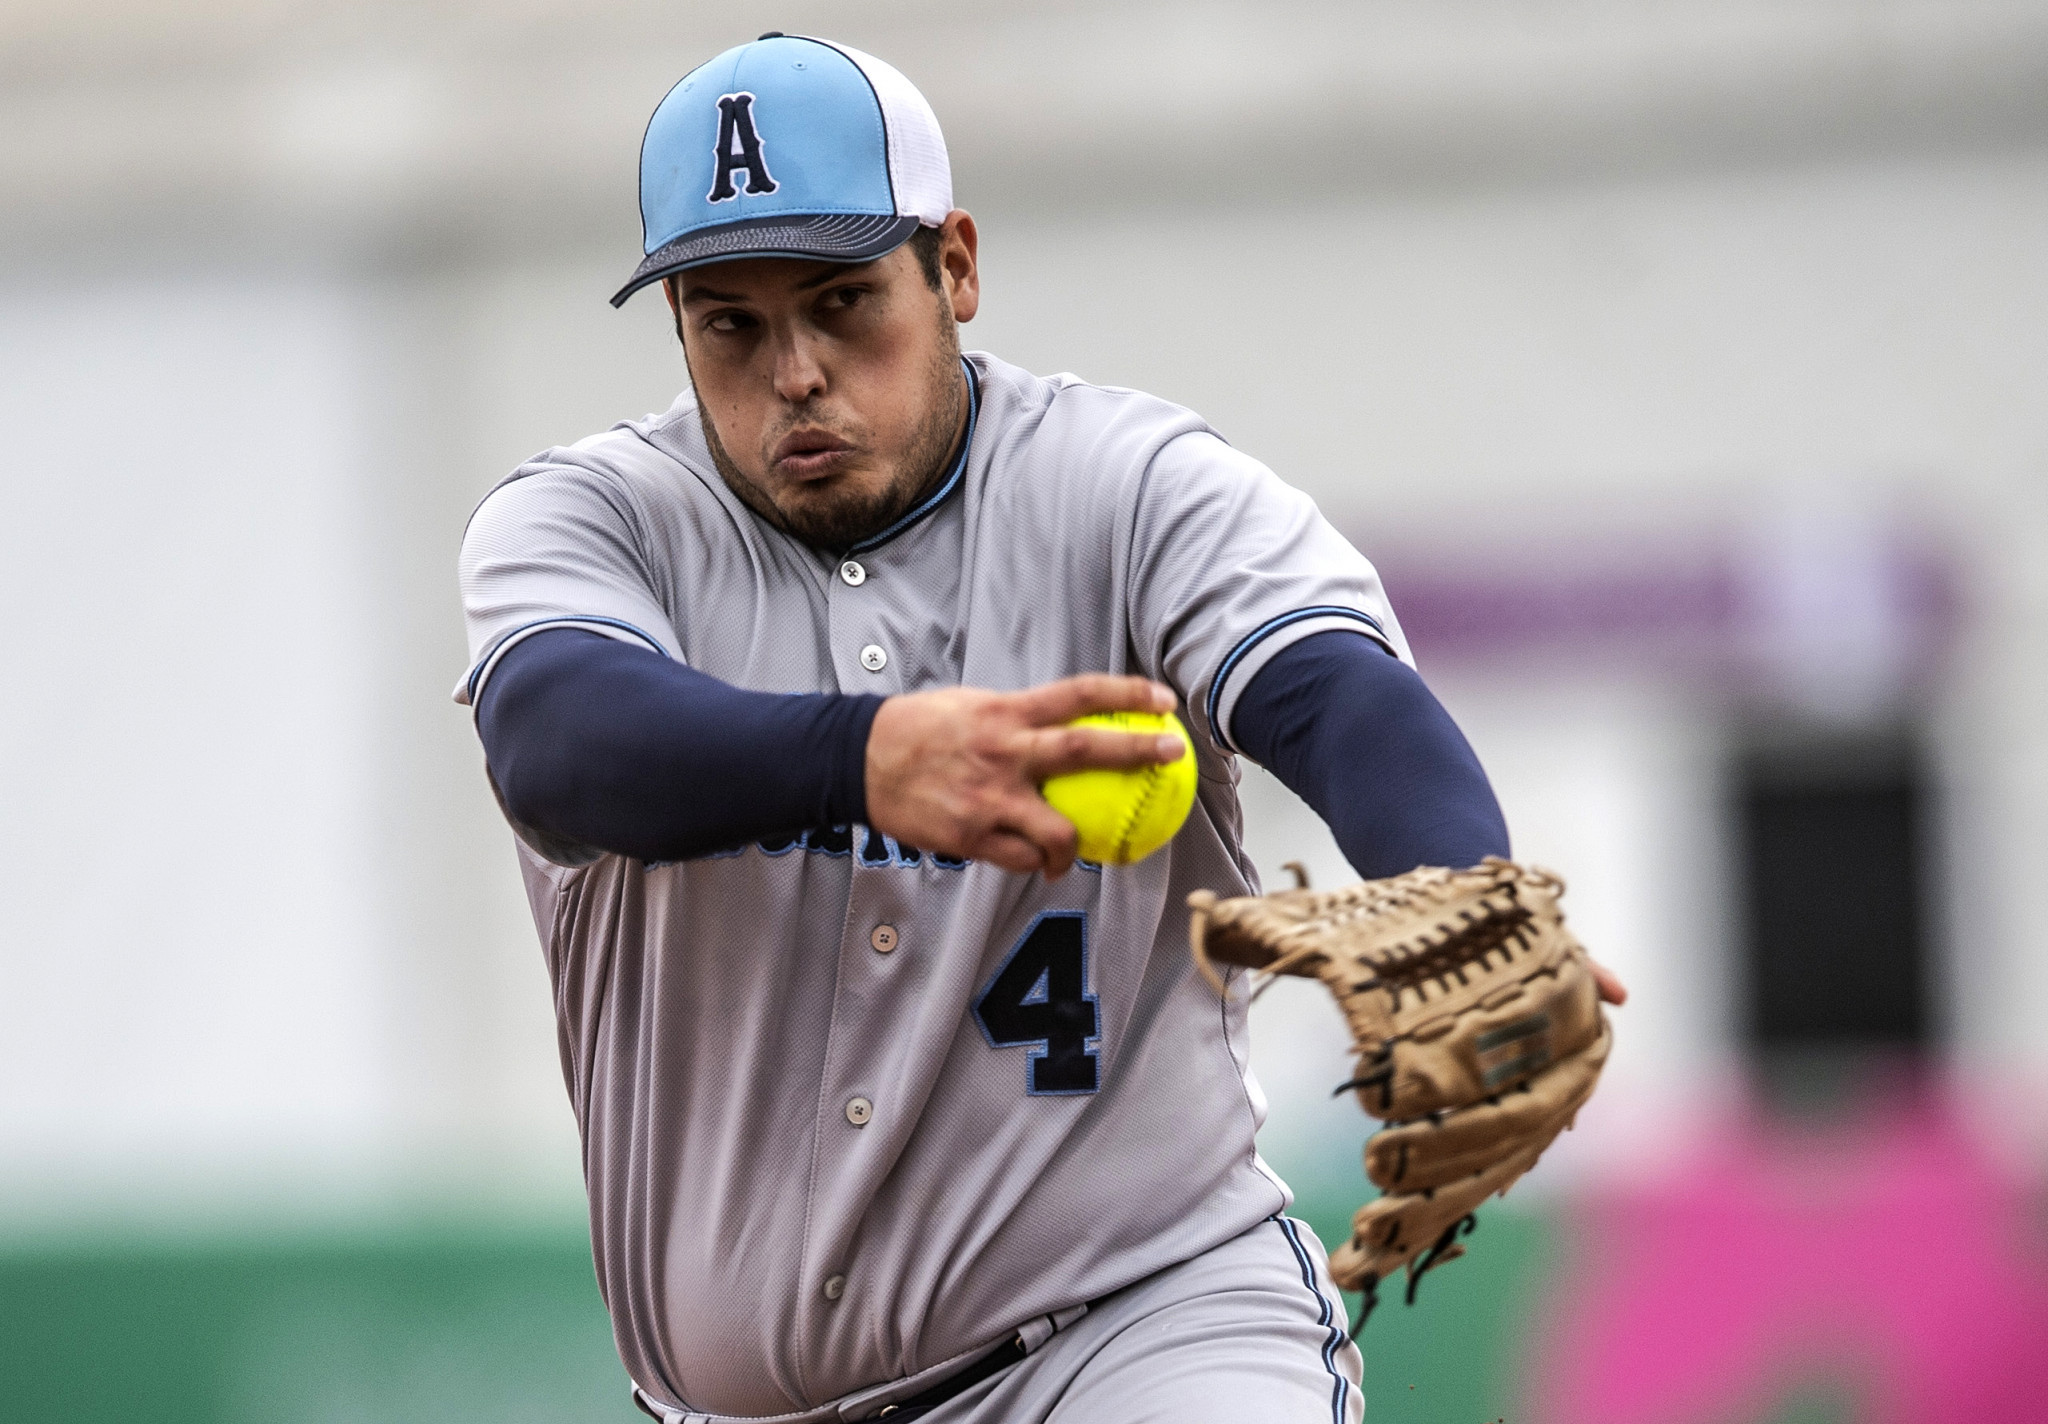 Argentina to host first Under-23 Men's Softball World Cup in 2021